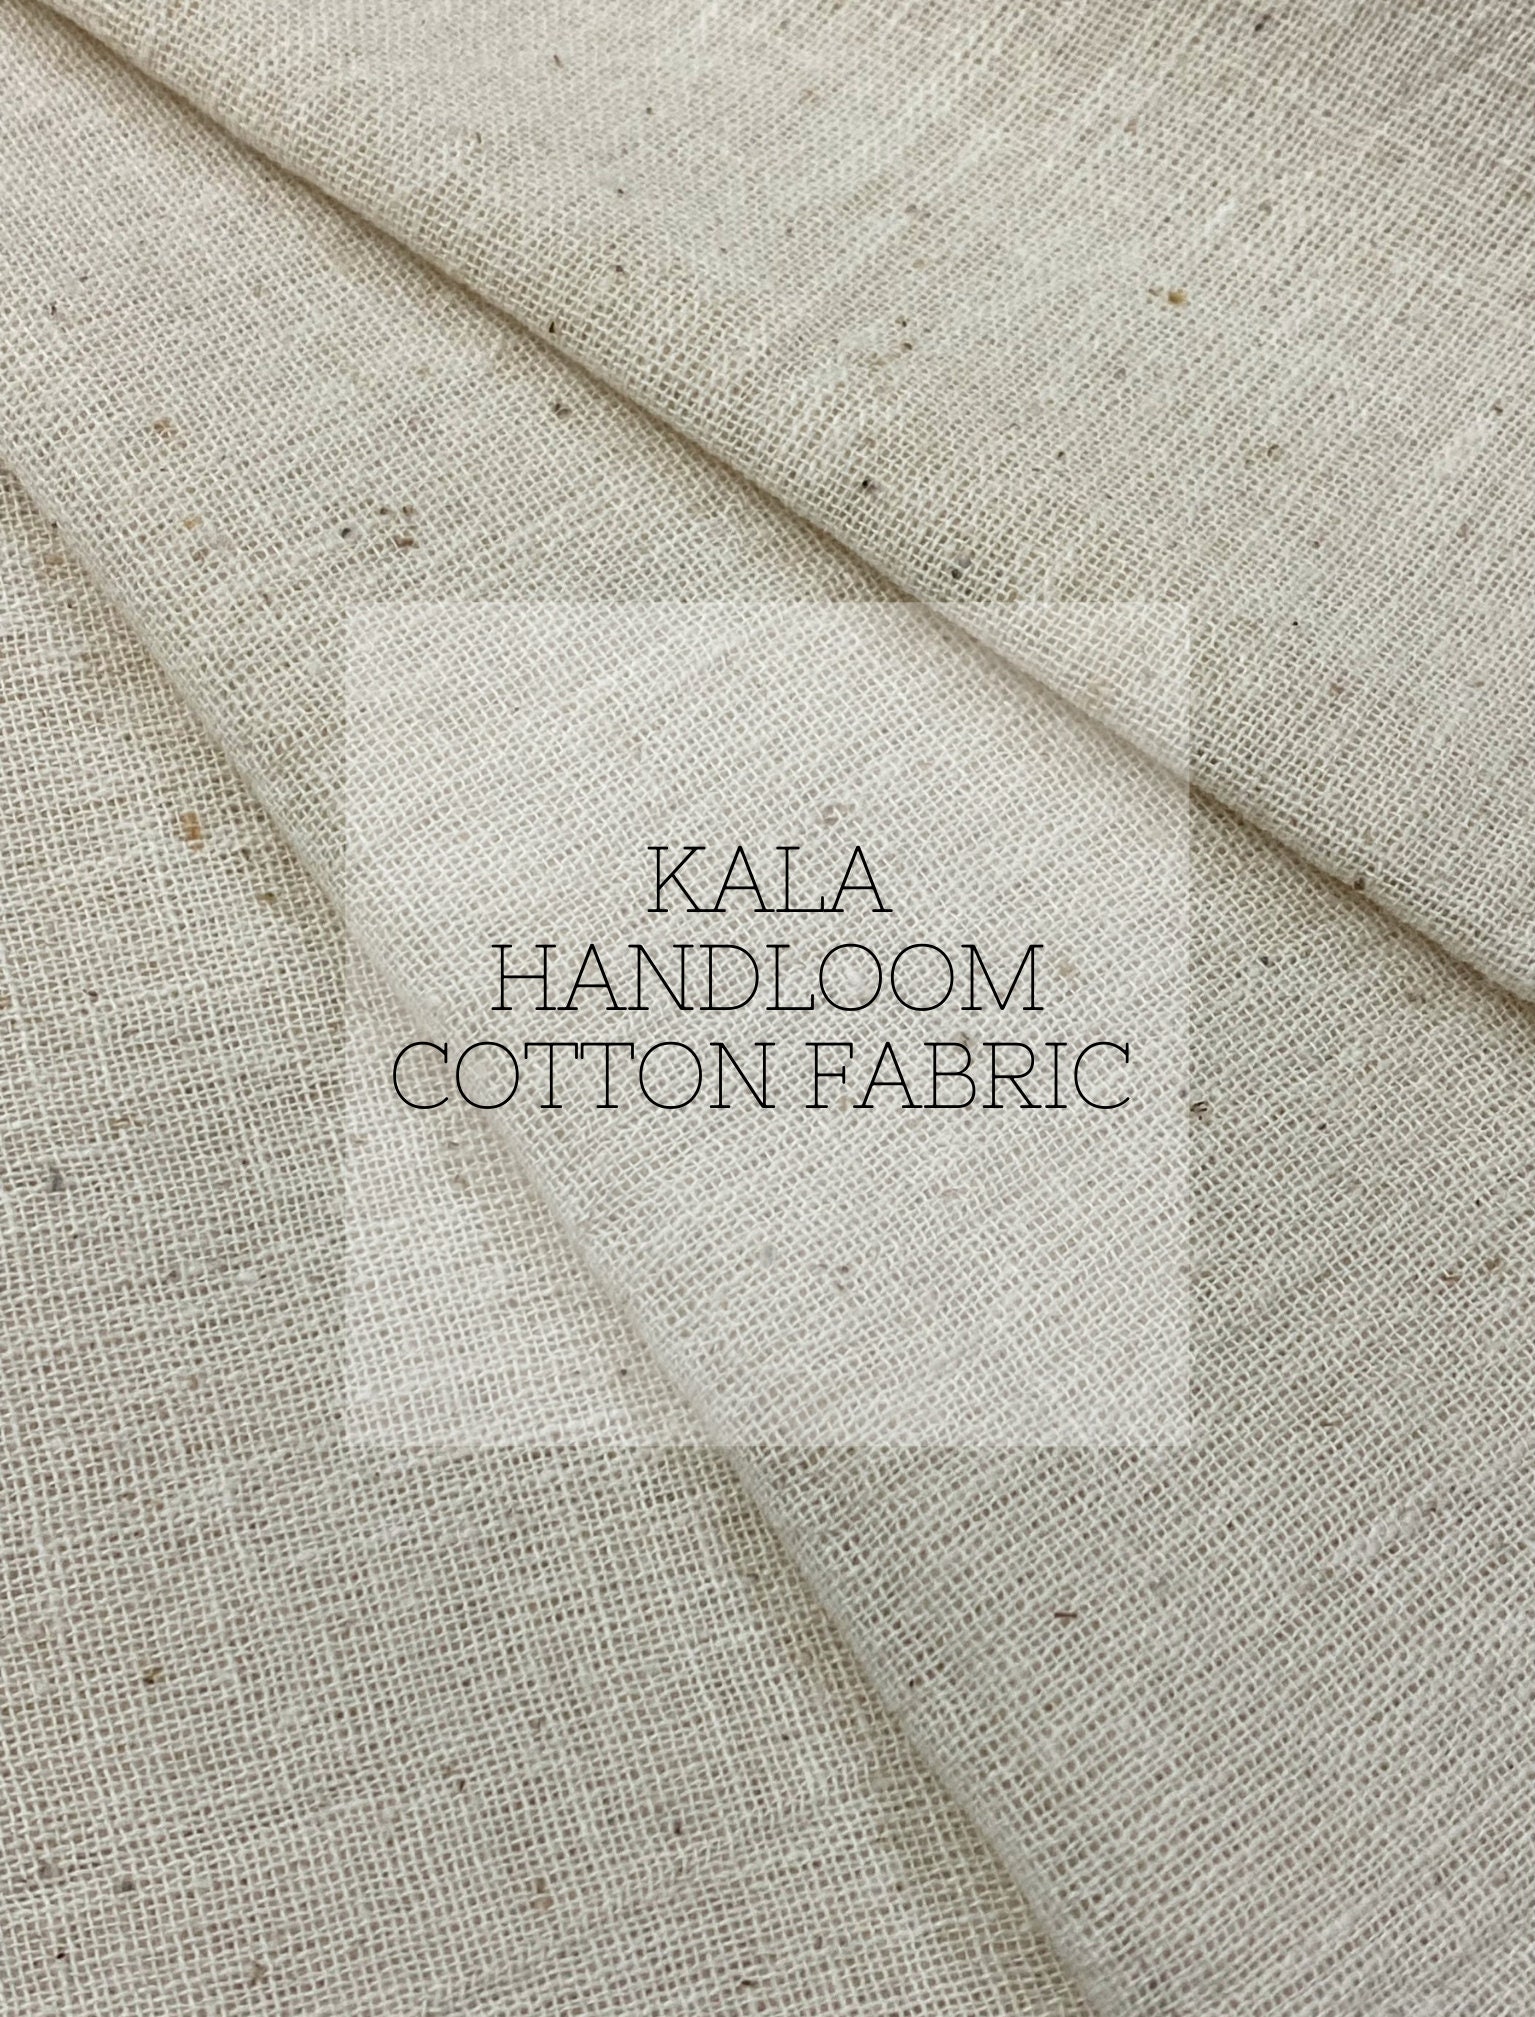 Cotton Canvas,calico & Cotton Linen Mix Fabrics for Craft,paint,apparel  Light Upholstery.unbleached Eco-friendly Vegan Material.dyeable 